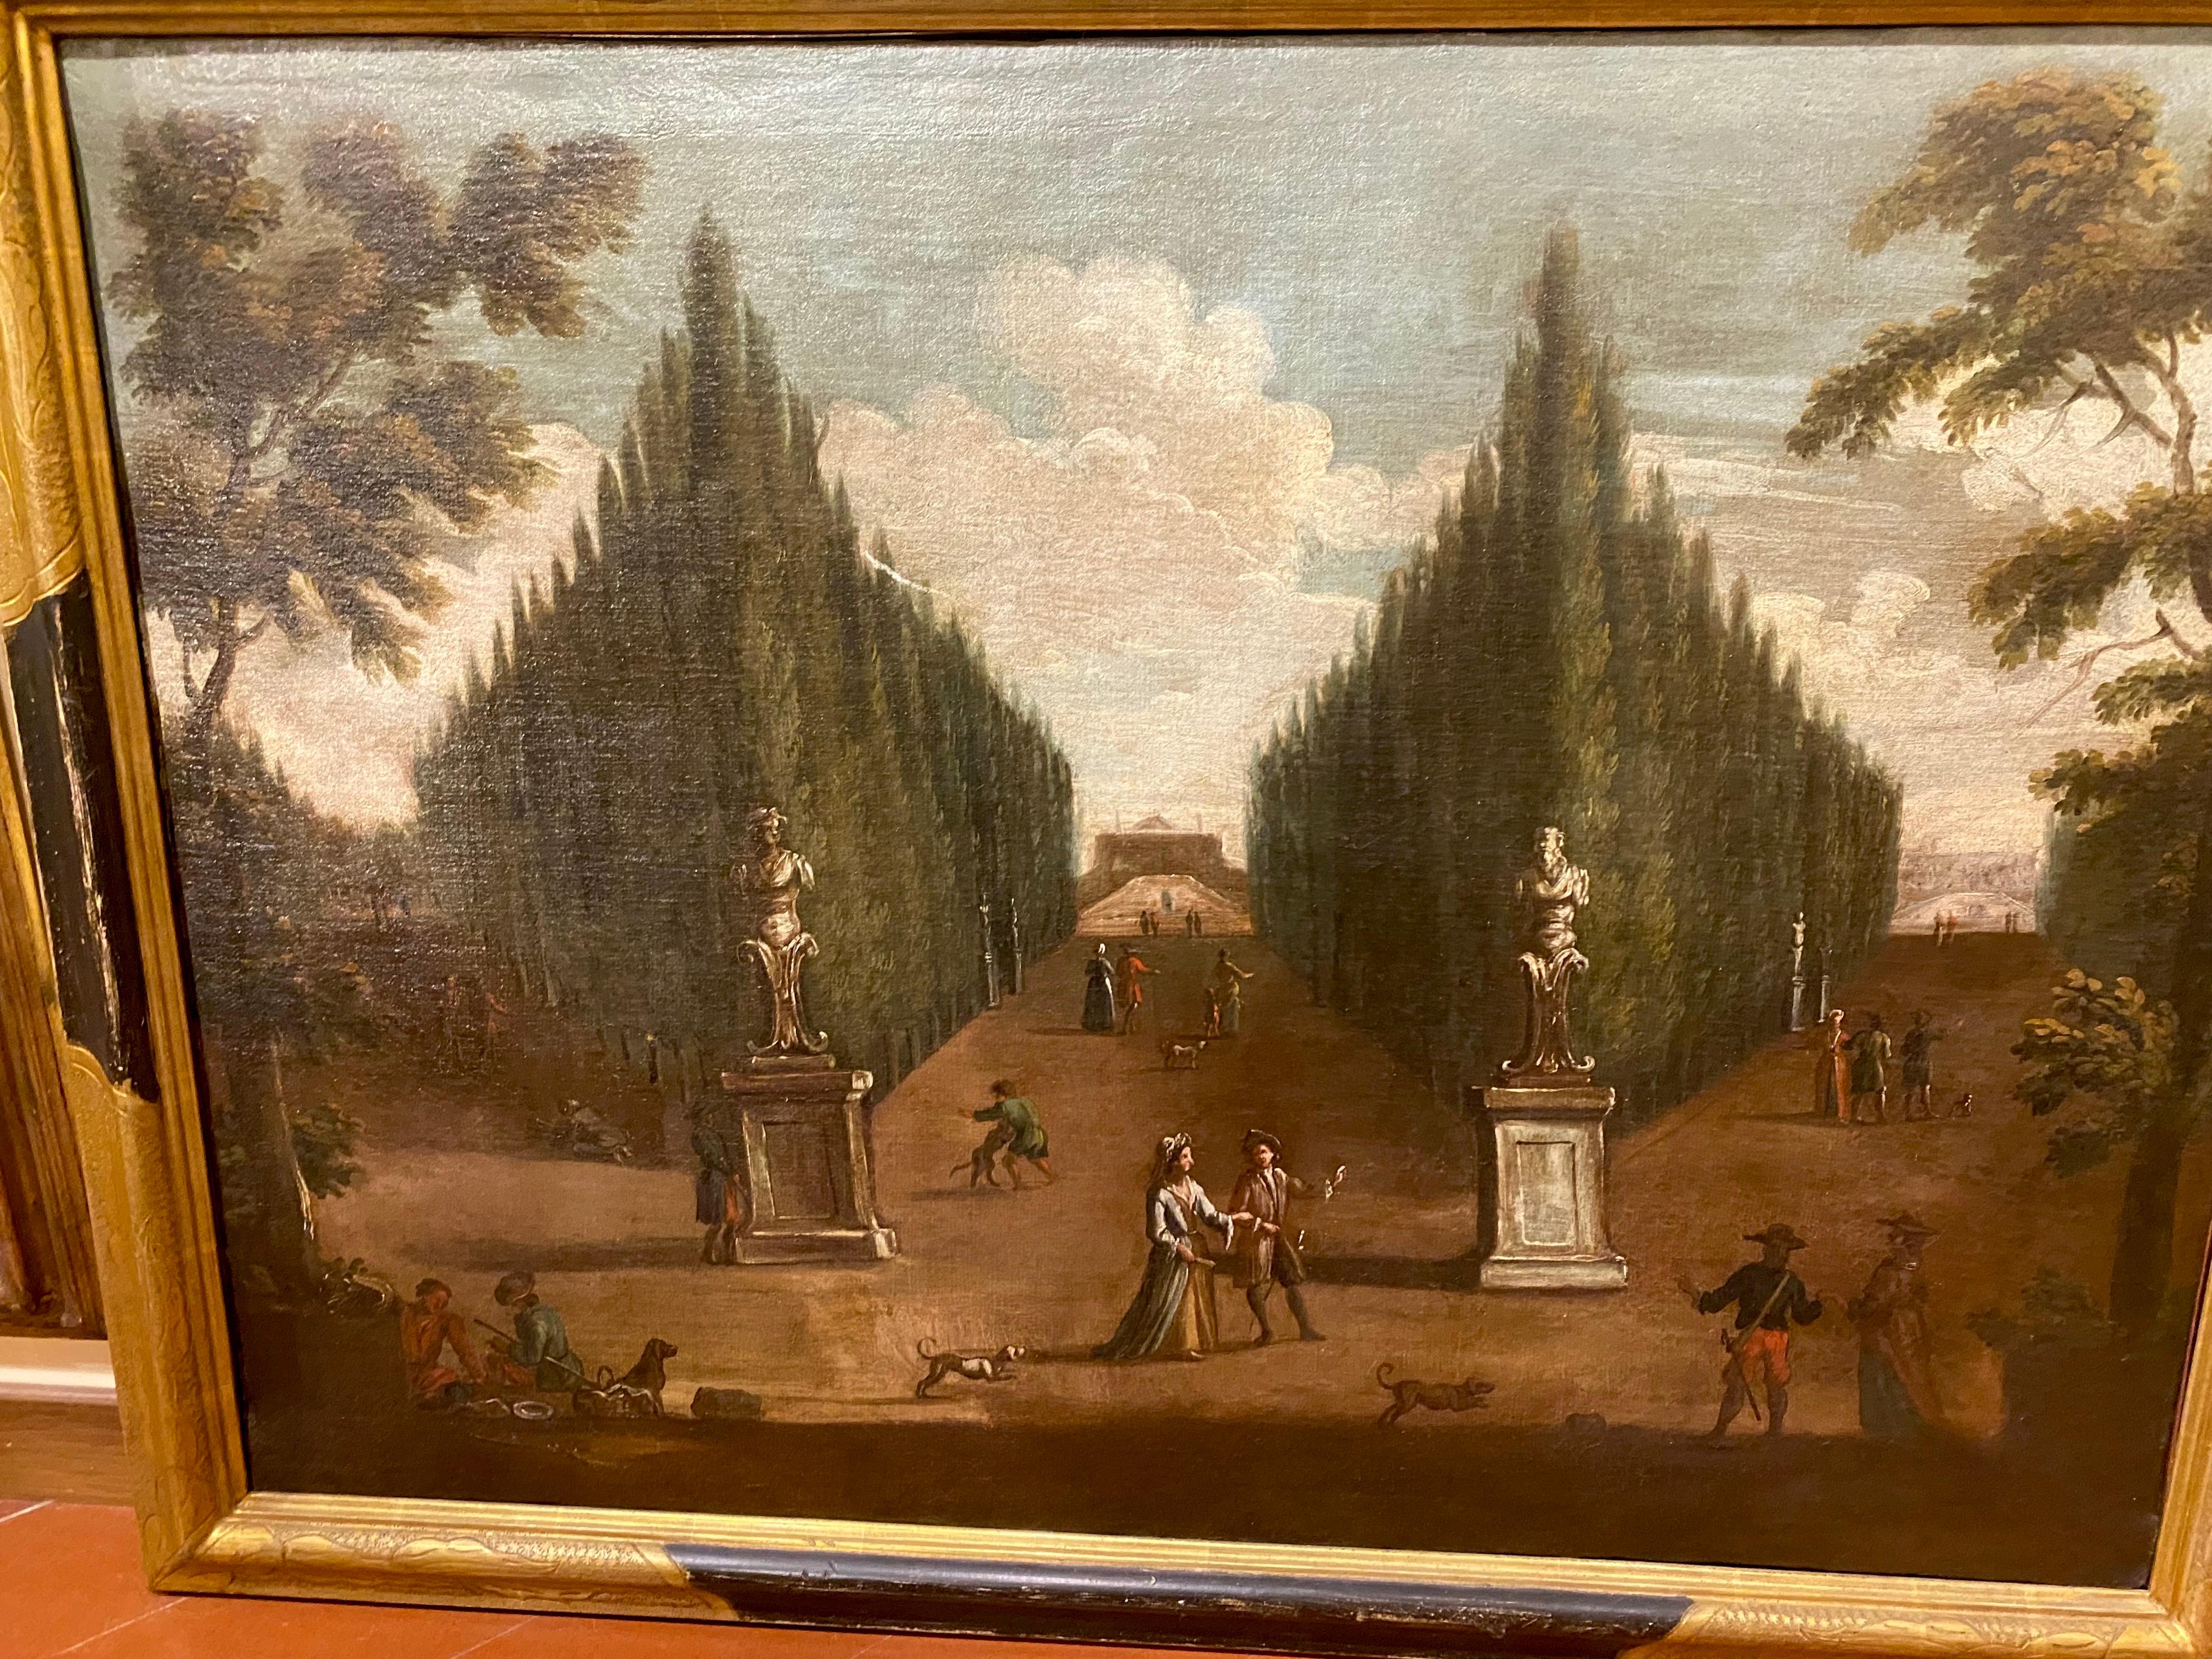 Pair of Italian 18' century Paintings with Gardens  - Black Landscape Painting by Unknown